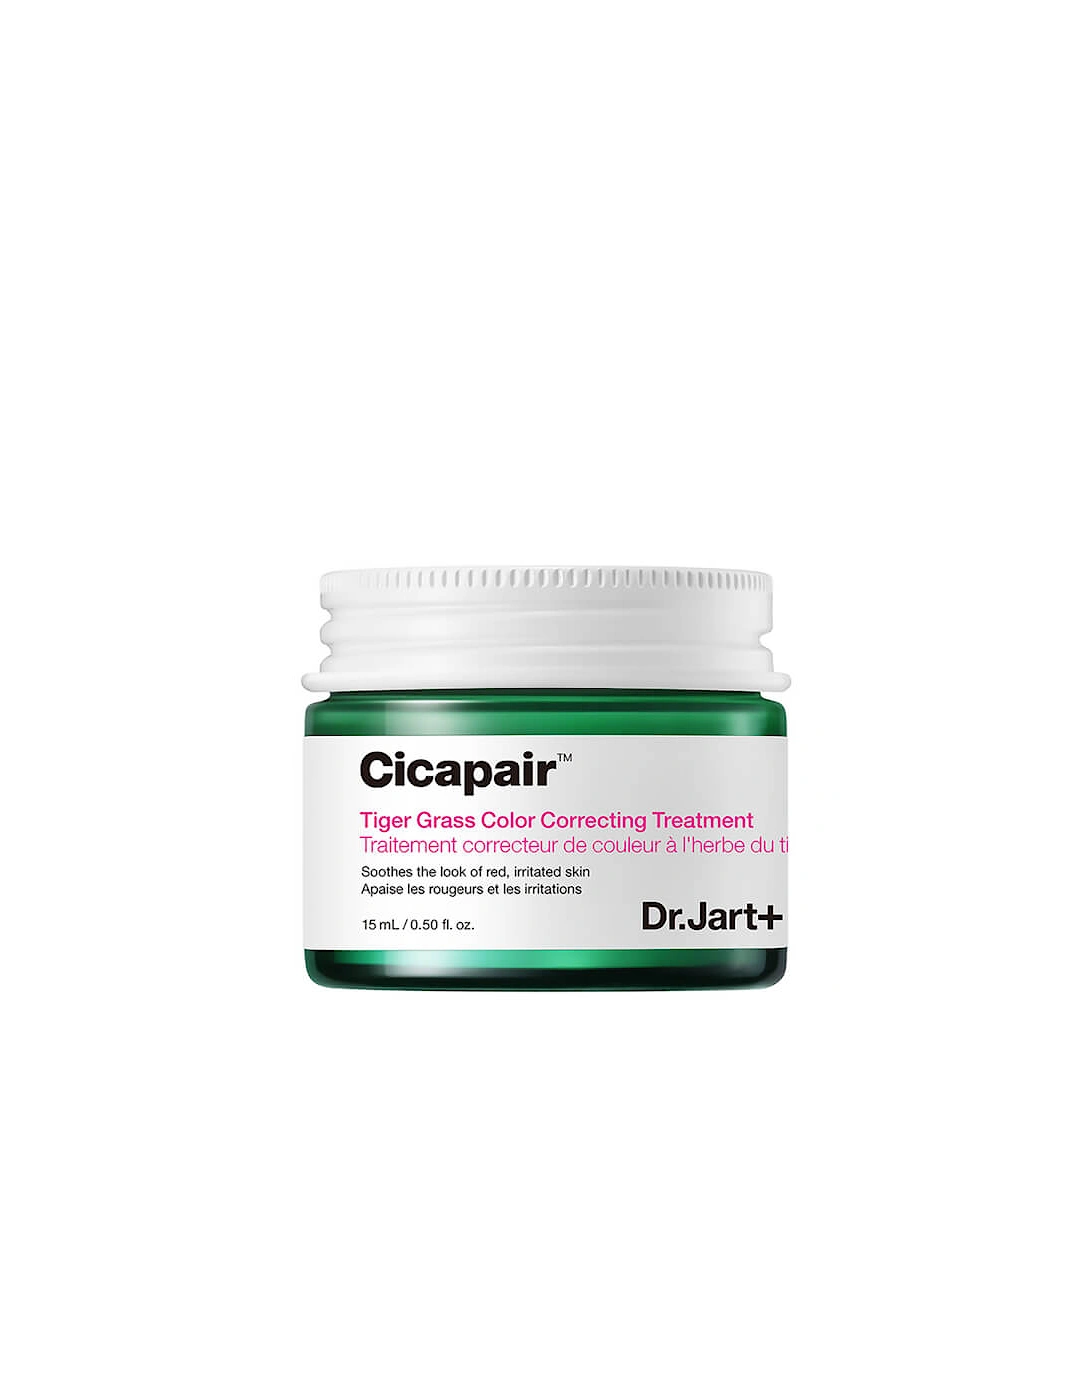 Dr.Jart+ Cicapair Tiger Grass Color Correcting Treatment 15ml, 3 of 2